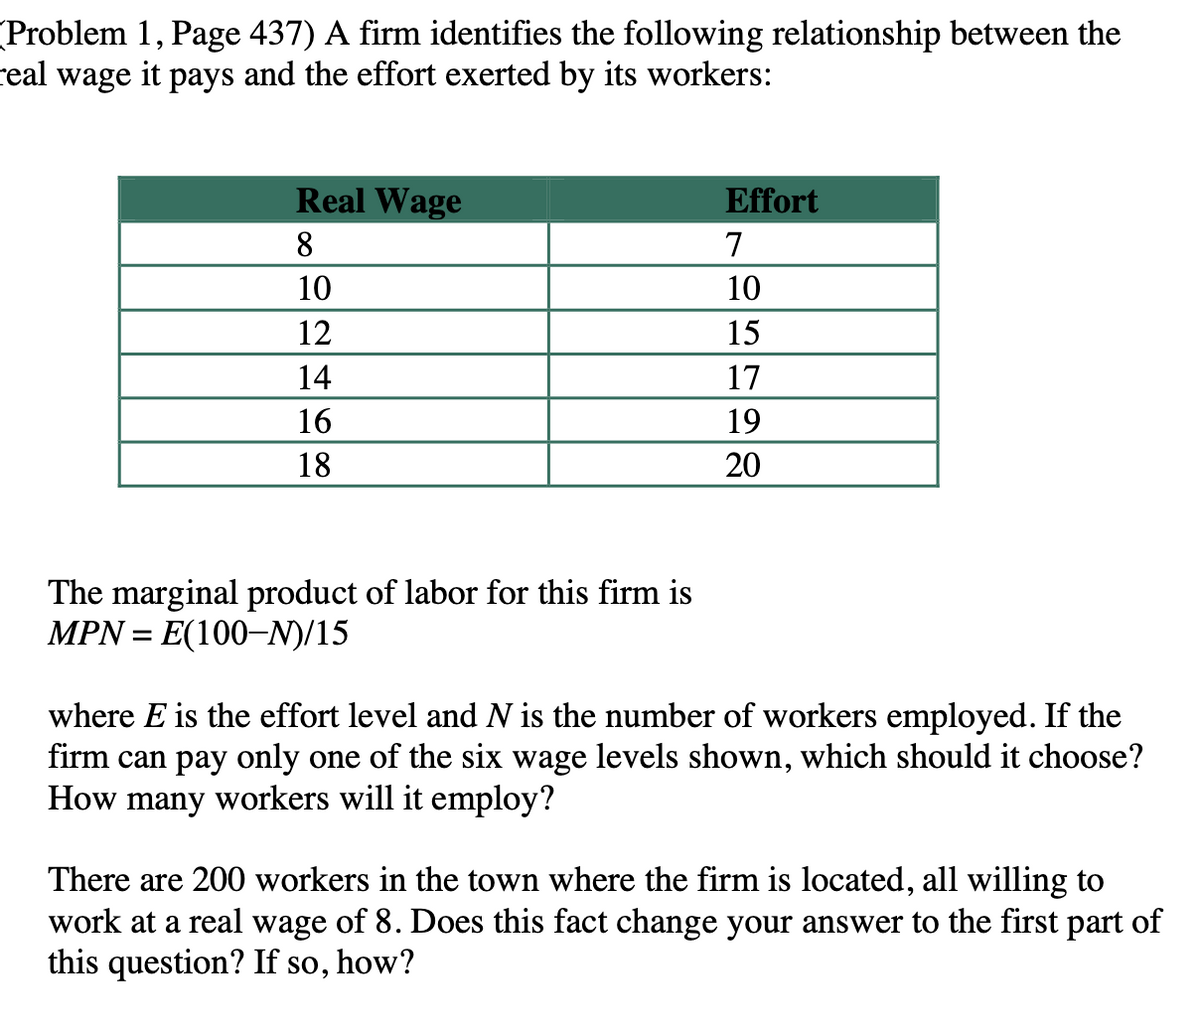 (Problem 1, Page 437) A firm identifies the following relationship between the
real wage it pays and the effort exerted by its workers:
Real Wage
8
10
12
14
16
18
The marginal product of labor for this firm is
MPN = E(100-N)/15
Effort
7
10
15
17
19
20
where E is the effort level and N is the number of workers employed. If the
firm can pay only one of the six wage levels shown, which should it choose?
How many workers will it employ?
There are 200 workers in the town where the firm is located, all willing to
work at a real wage of 8. Does this fact change your answer to the first part of
this question? If so, how?